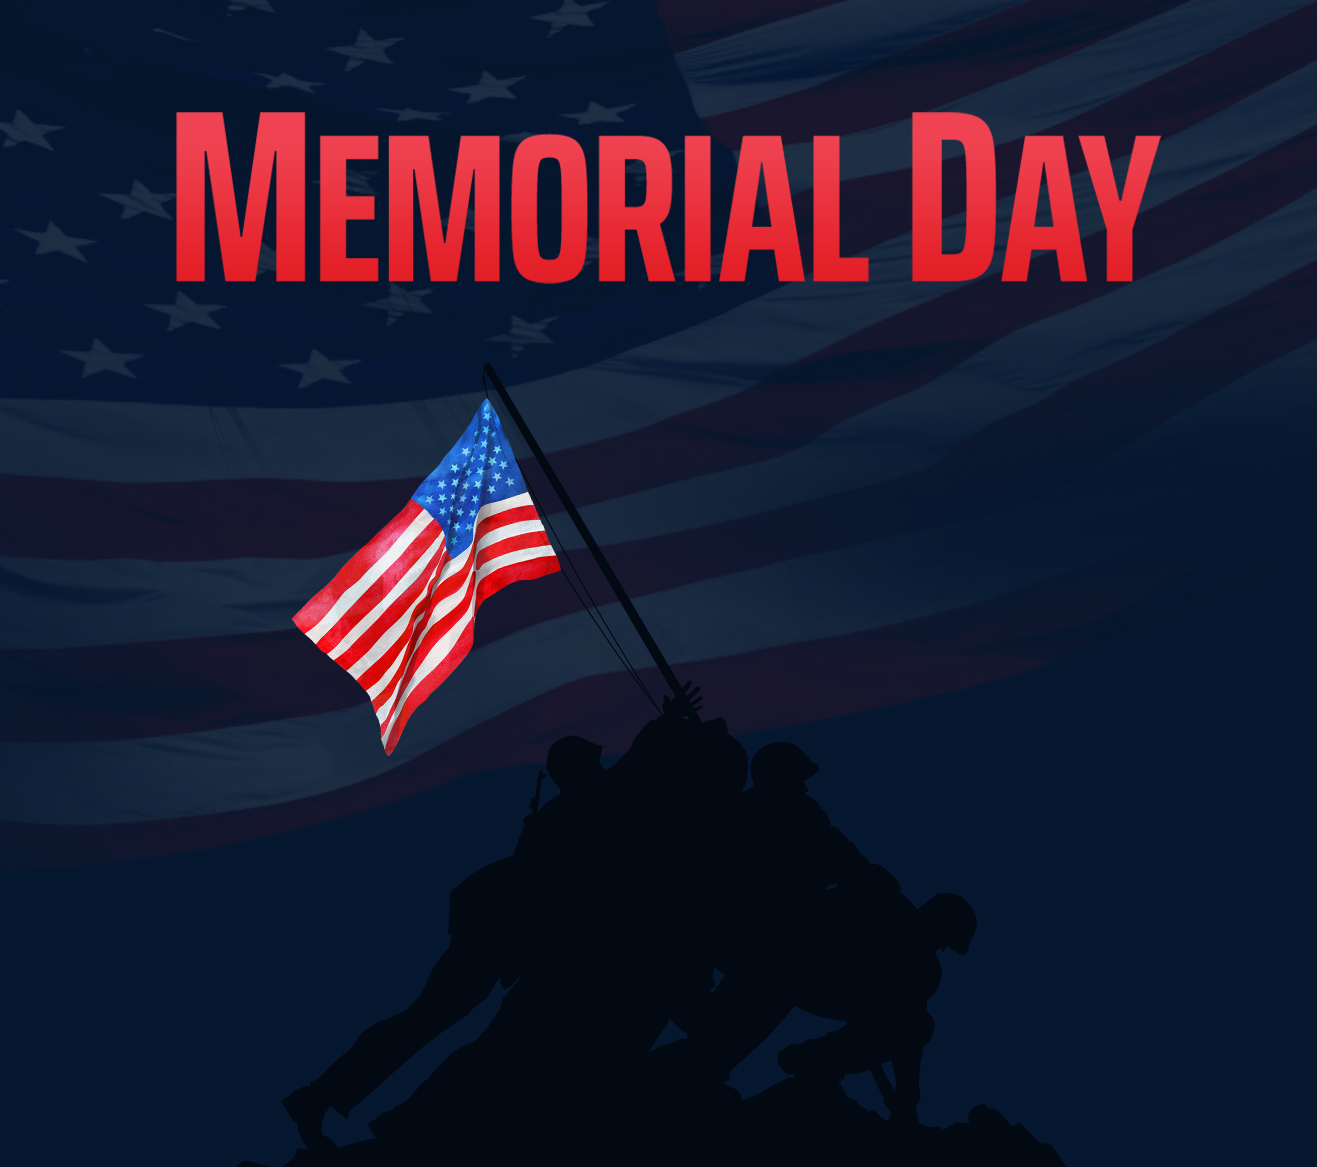 10 Ways to Recognize Memorial Day at Your Organization